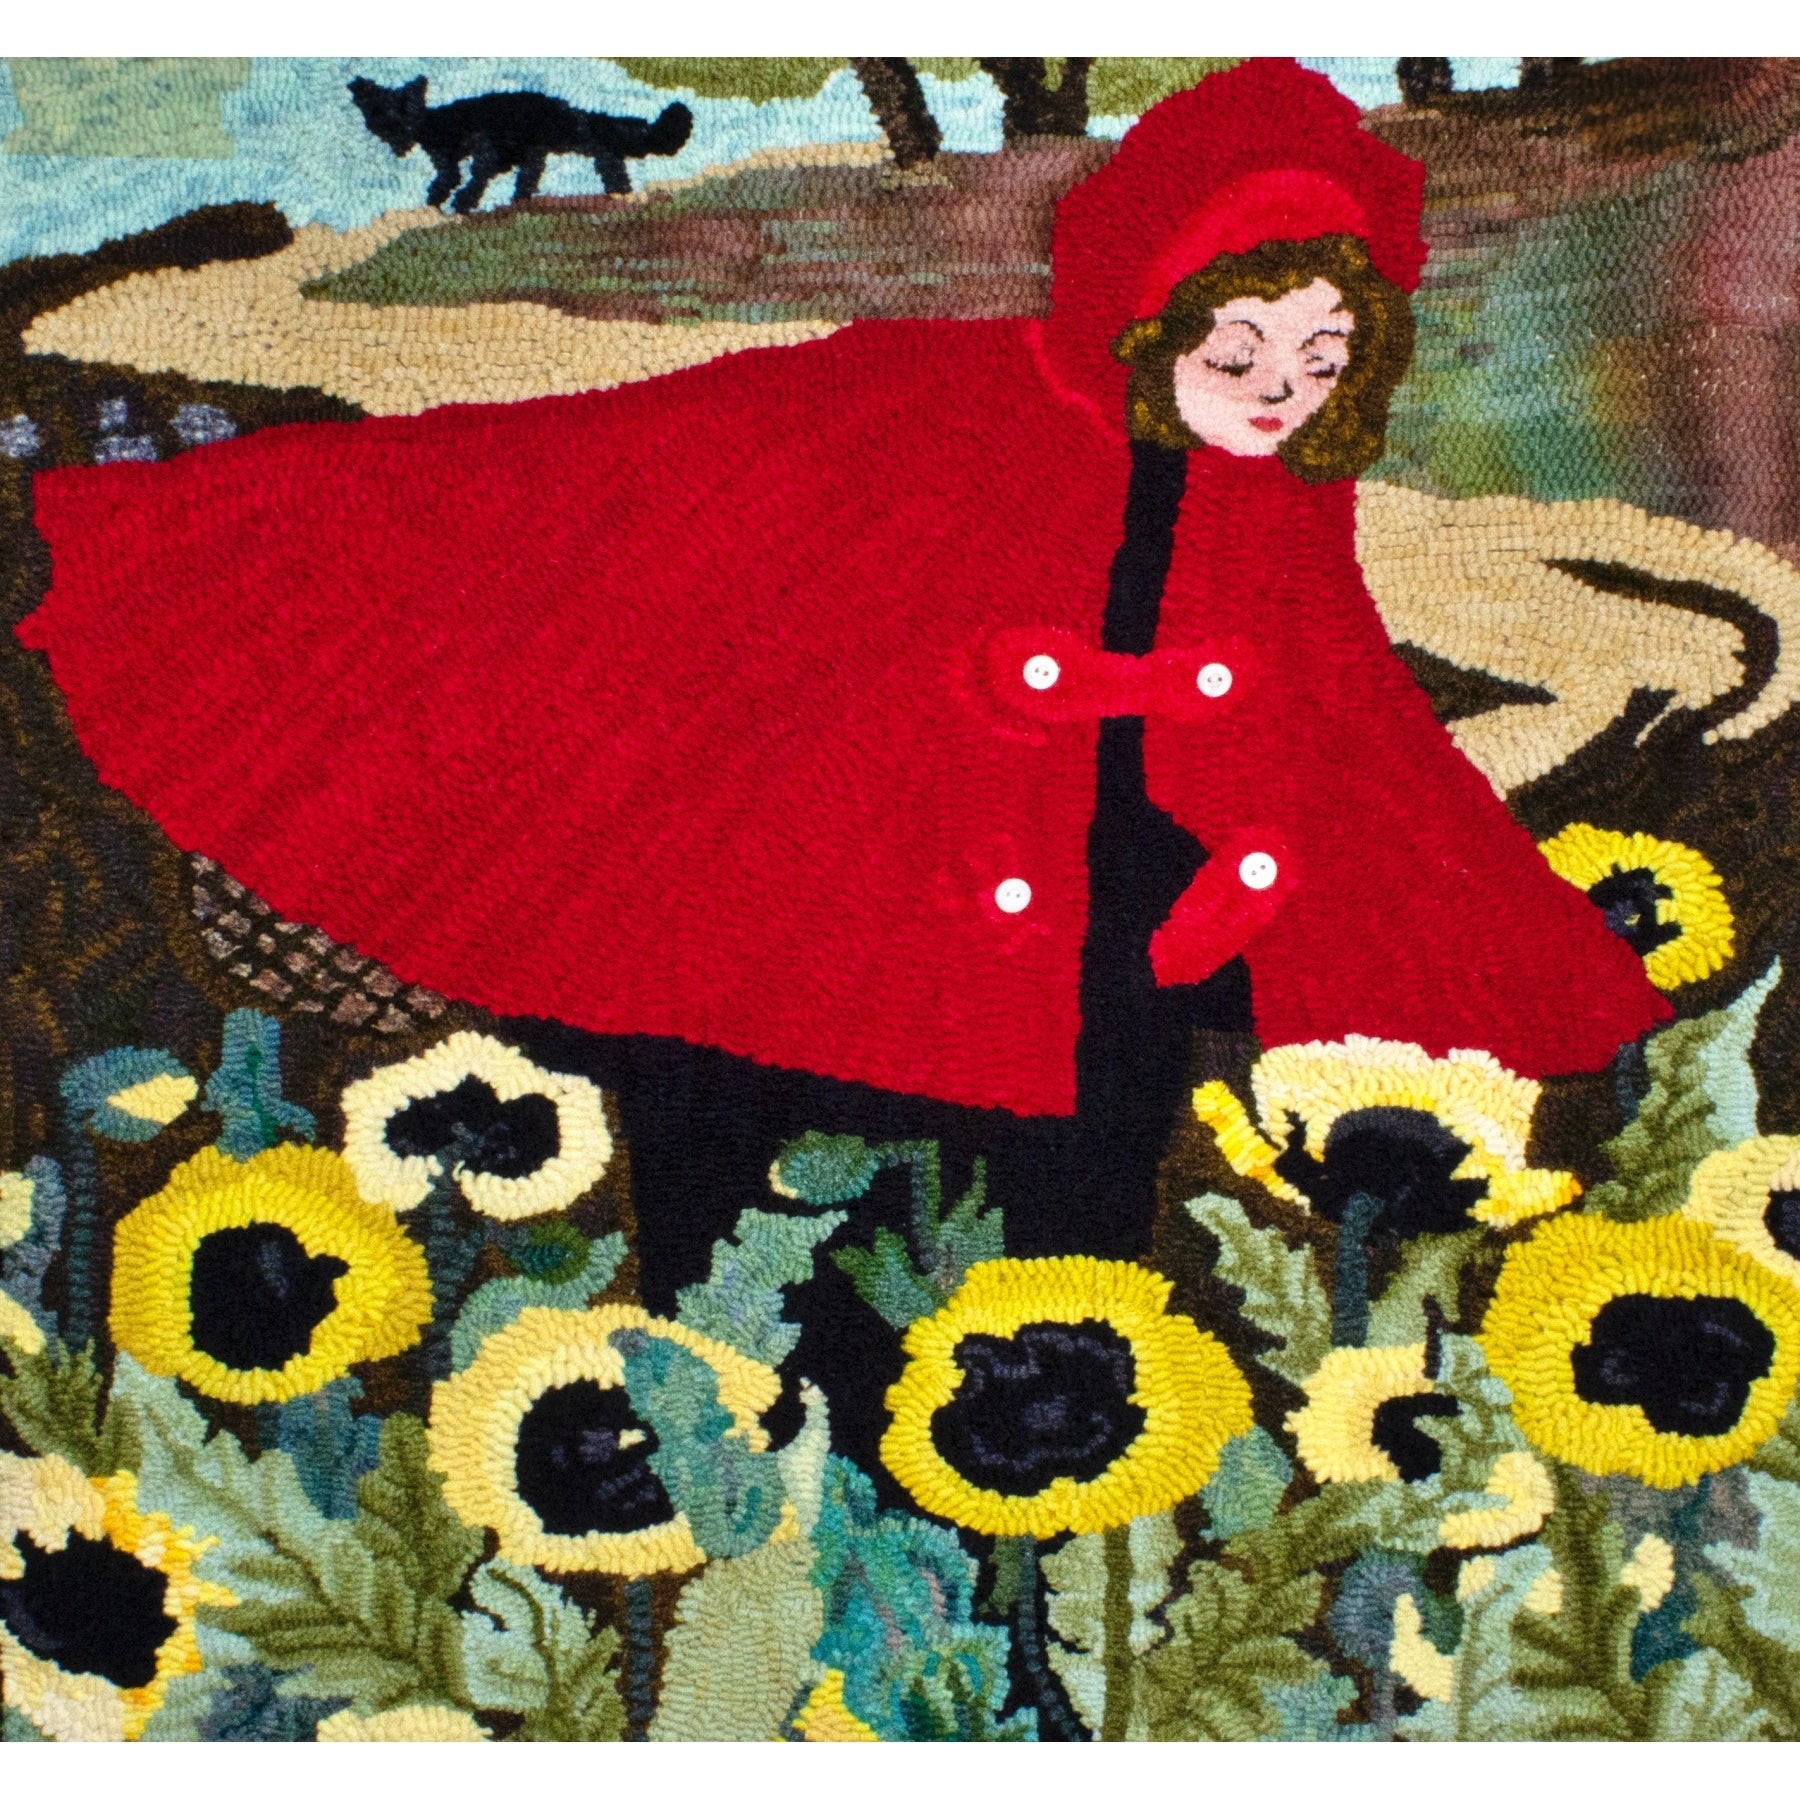 Red Riding Hood Poster, rug hooked by Pam Schmelze